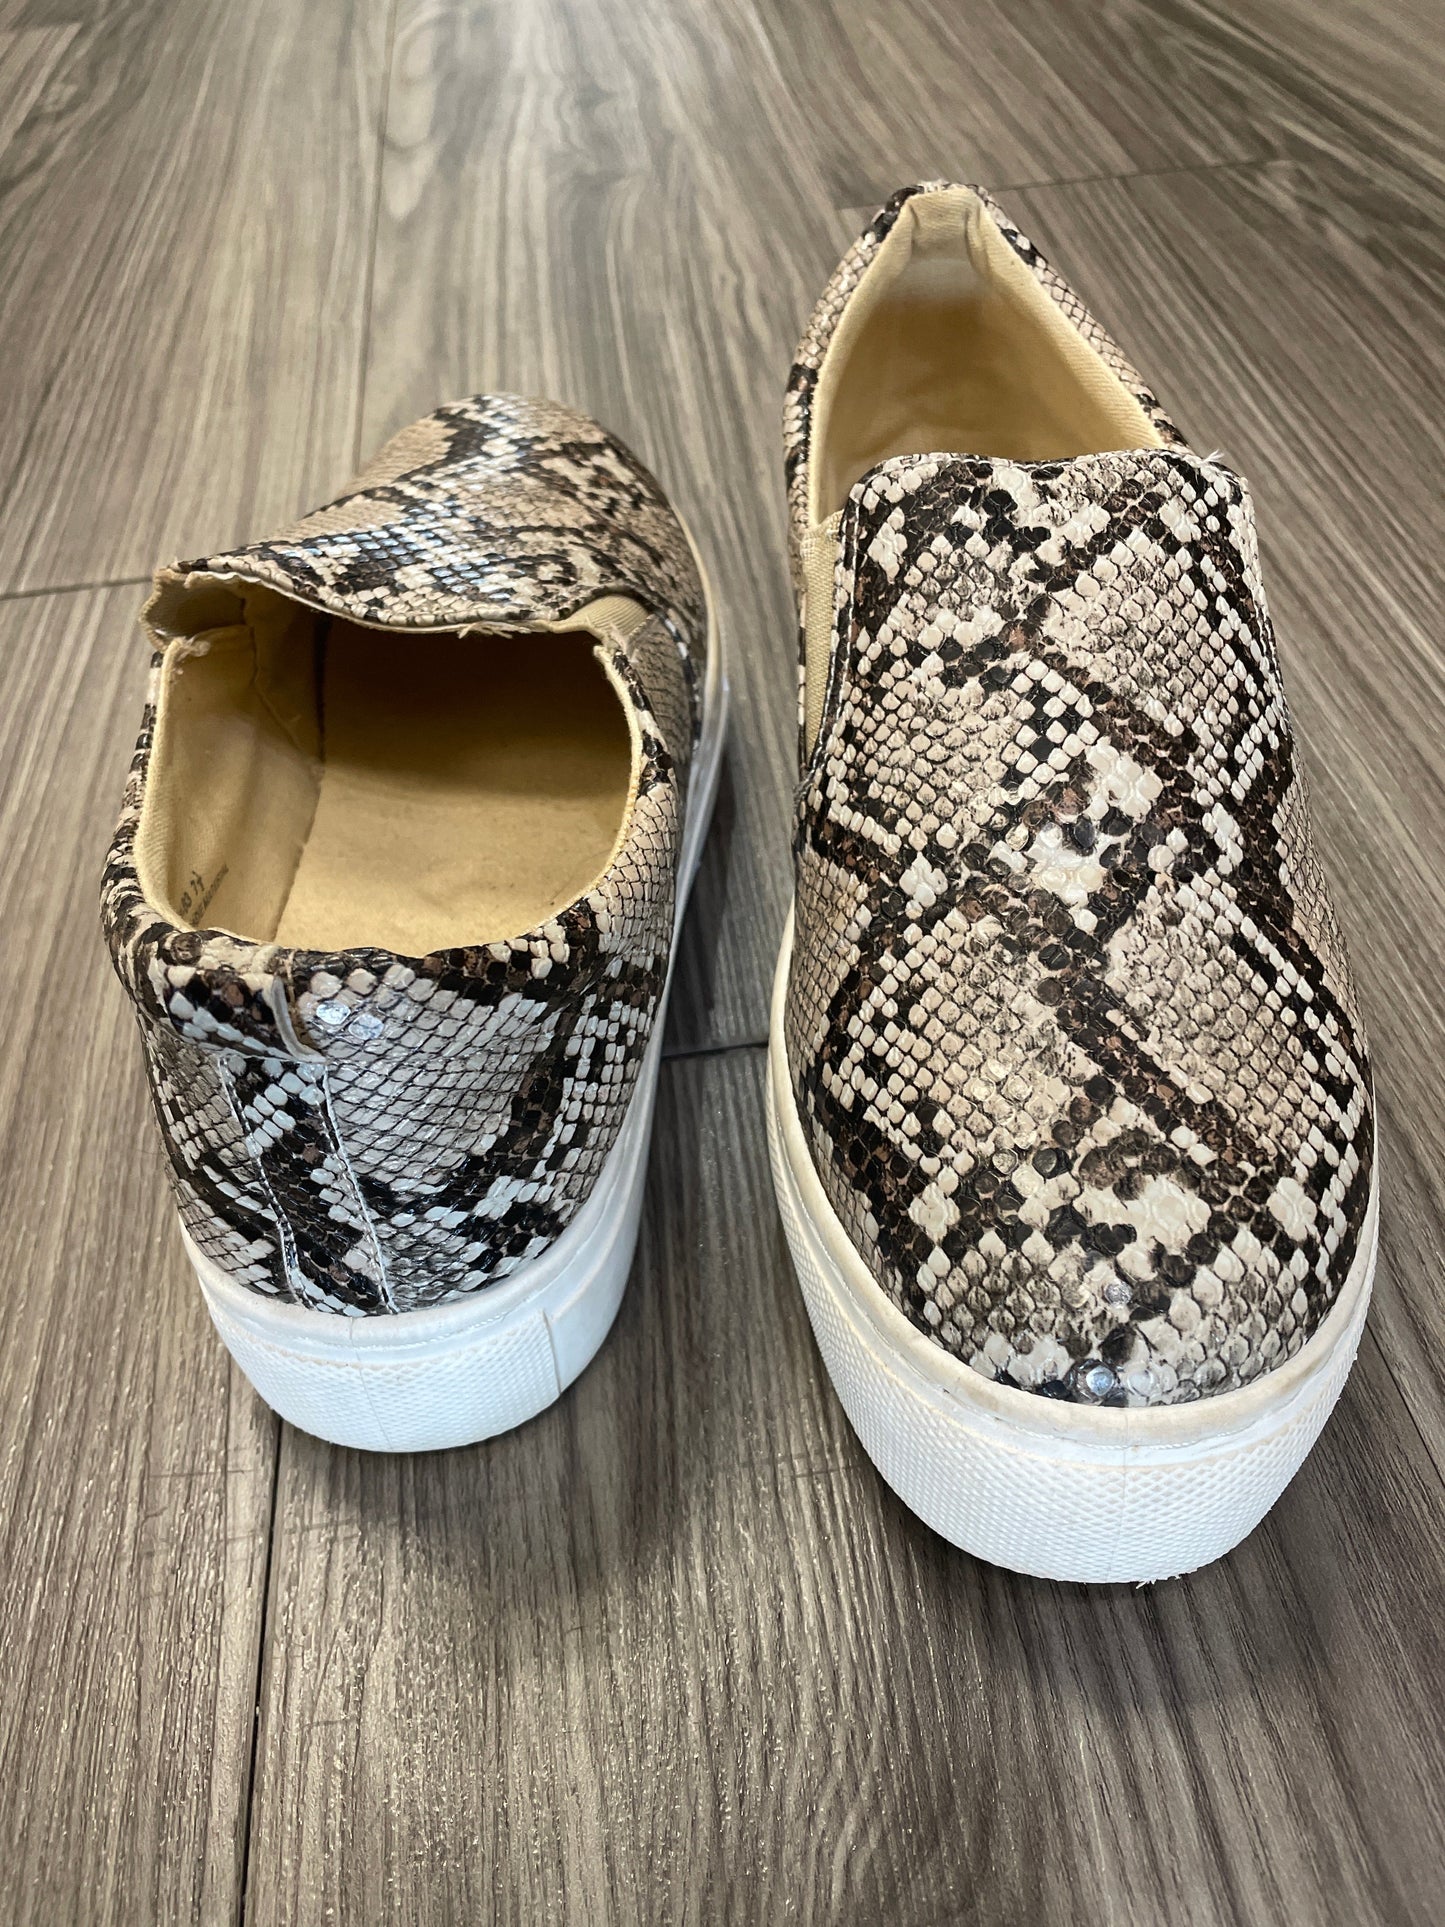 Animal Print Shoes Sneakers Platform Bamboo, Size 7.5